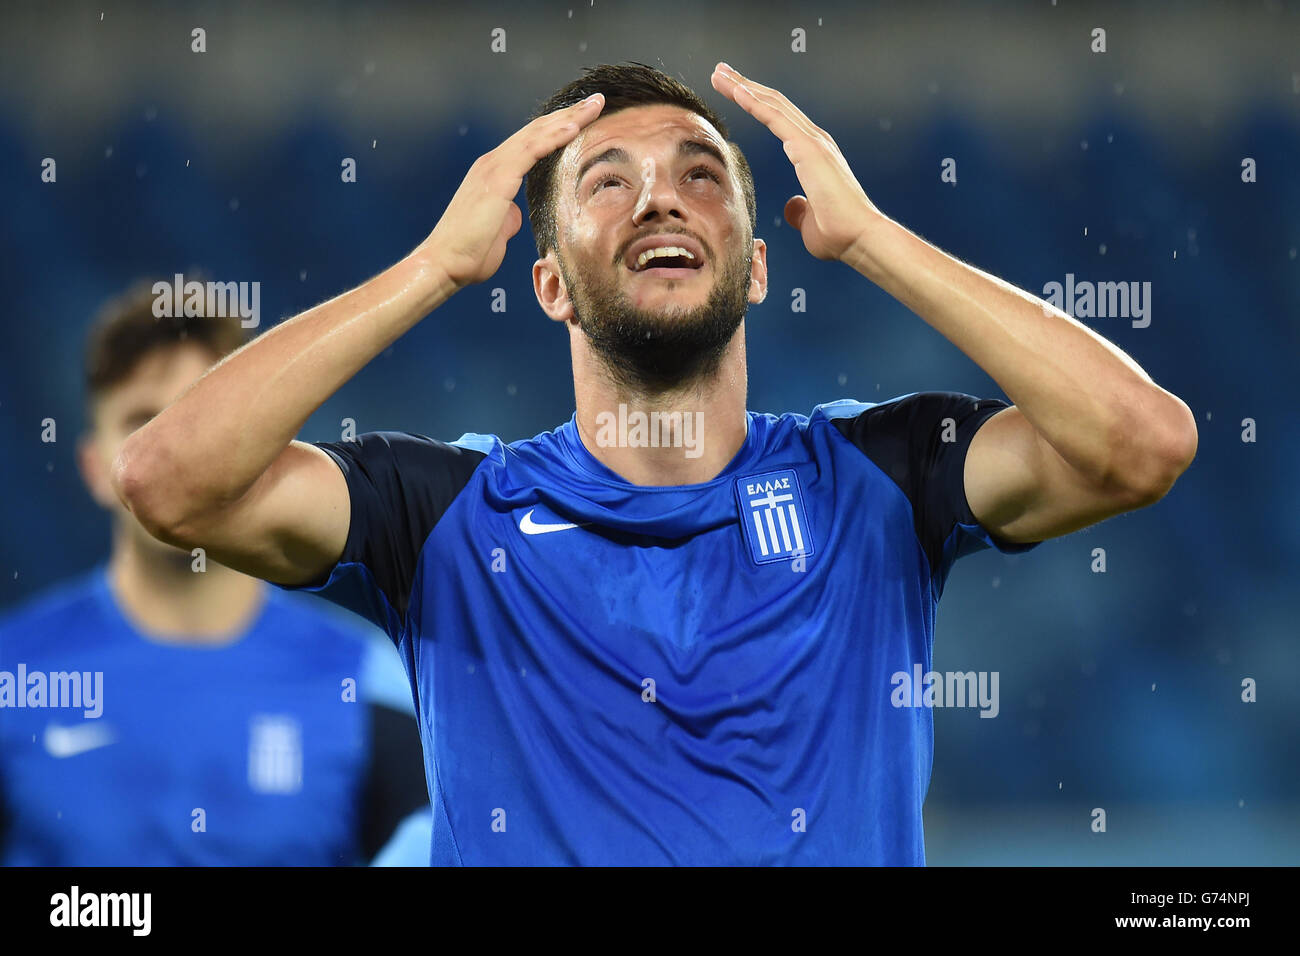 Soccer - FIFA World Cup 2014 - Group C - Japan v Greece - Greece Training and Press Conference - Estadio das Dunas. Greece's Andreas Samaris reacts as rain begins to fall during a training session at Arena das Dunas in Natal Stock Photo